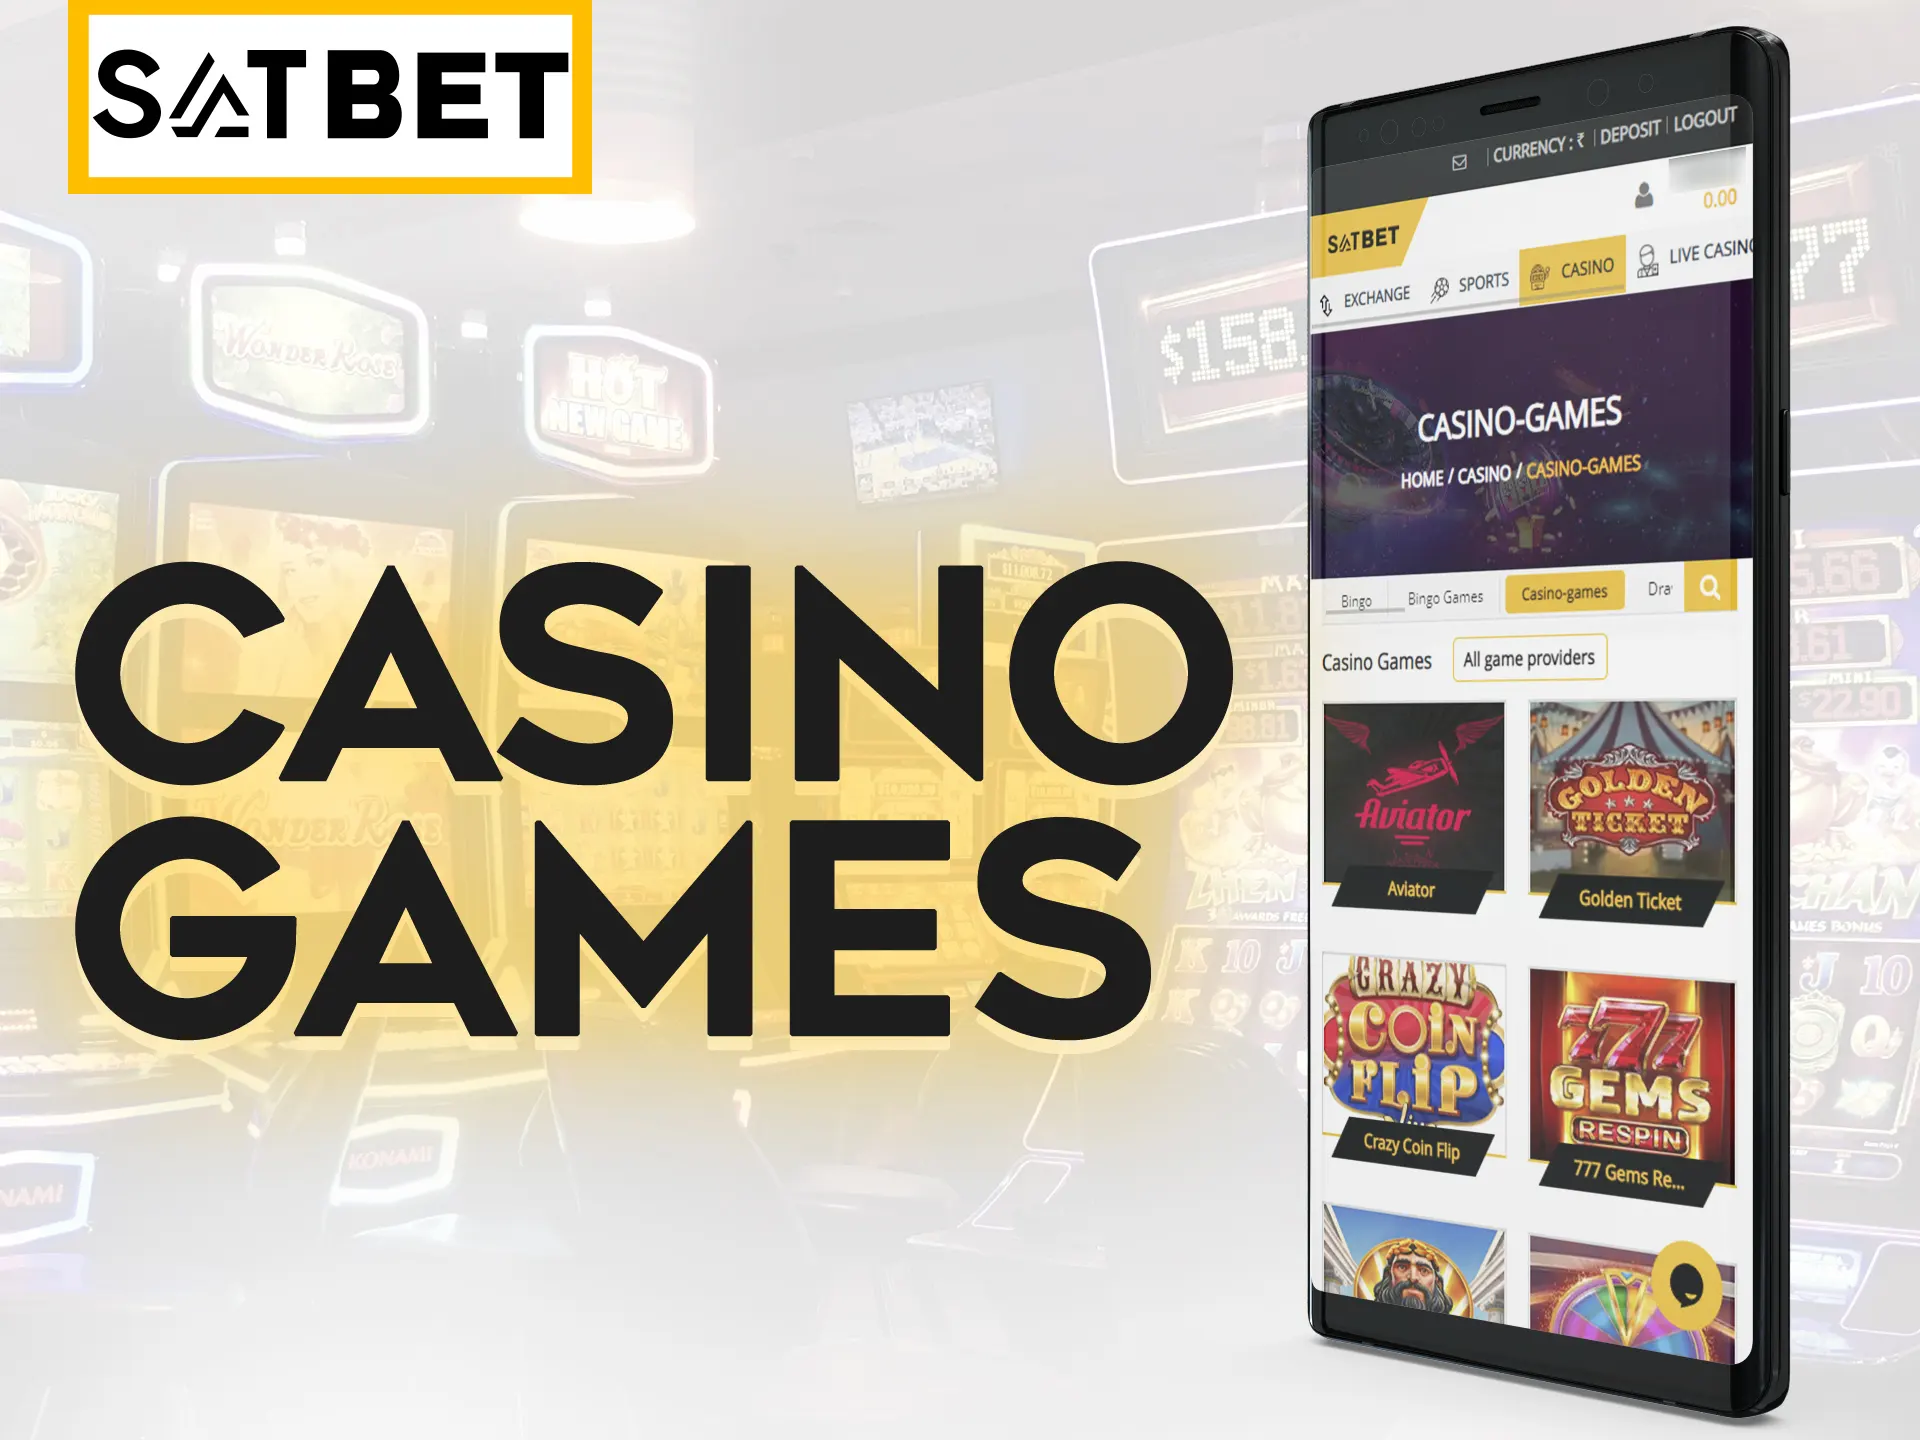 Search for your favourite casino games in Satbet app.